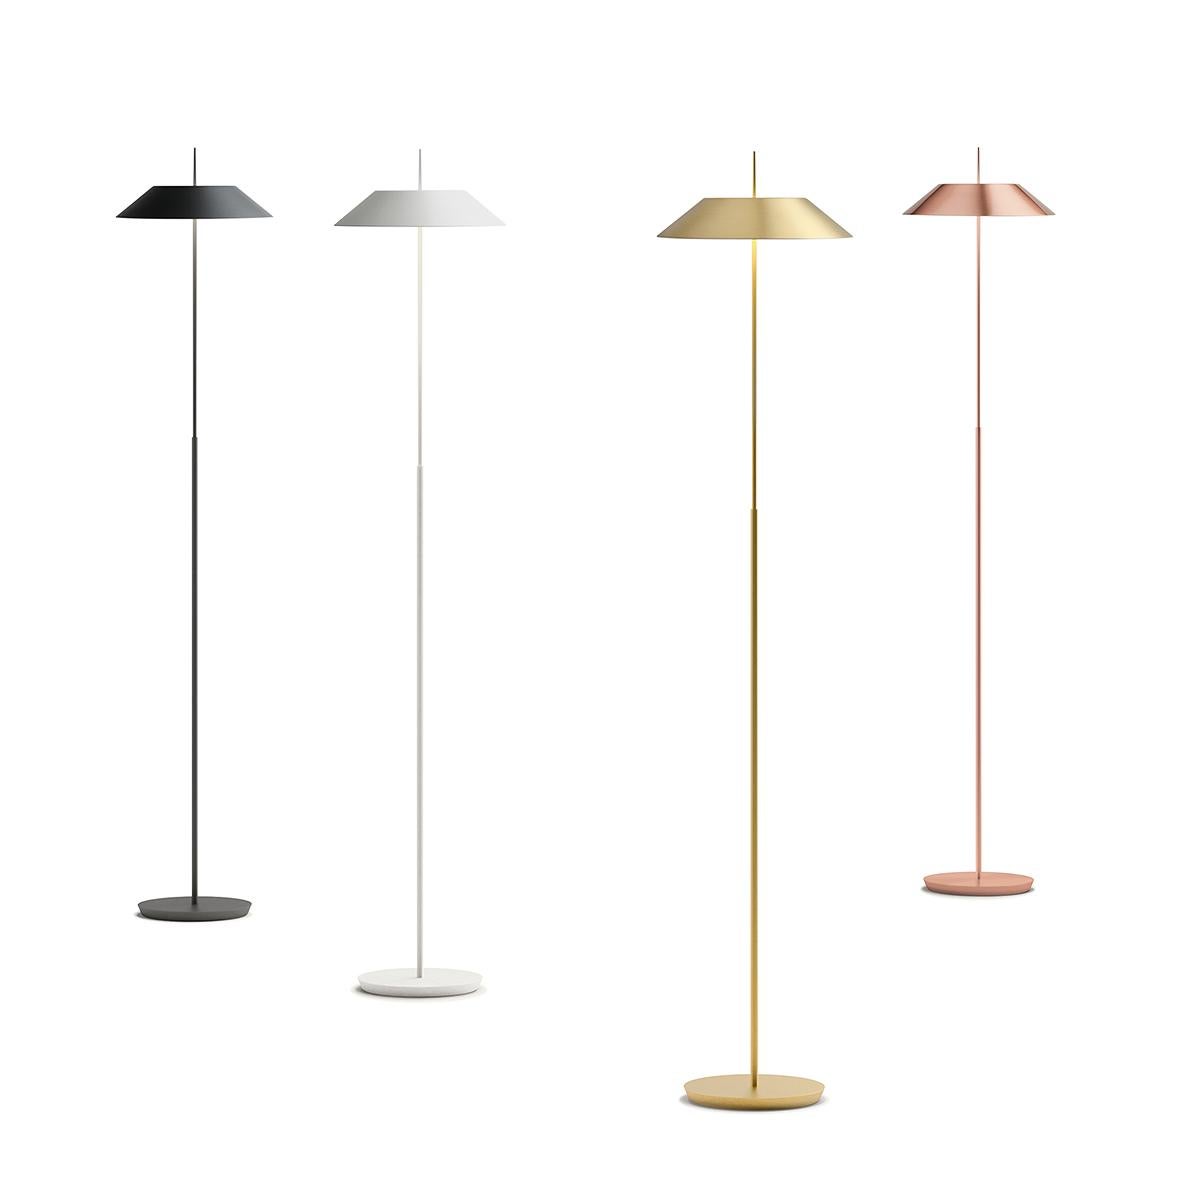 The Mayfair lamps are a Diego Fortunato design proposal. The entire Mayfair collection incorporates LED lighting and comes in various finishes: white, gold and copper.

Installation type: Surface mounted

Shade: Polycarbonate